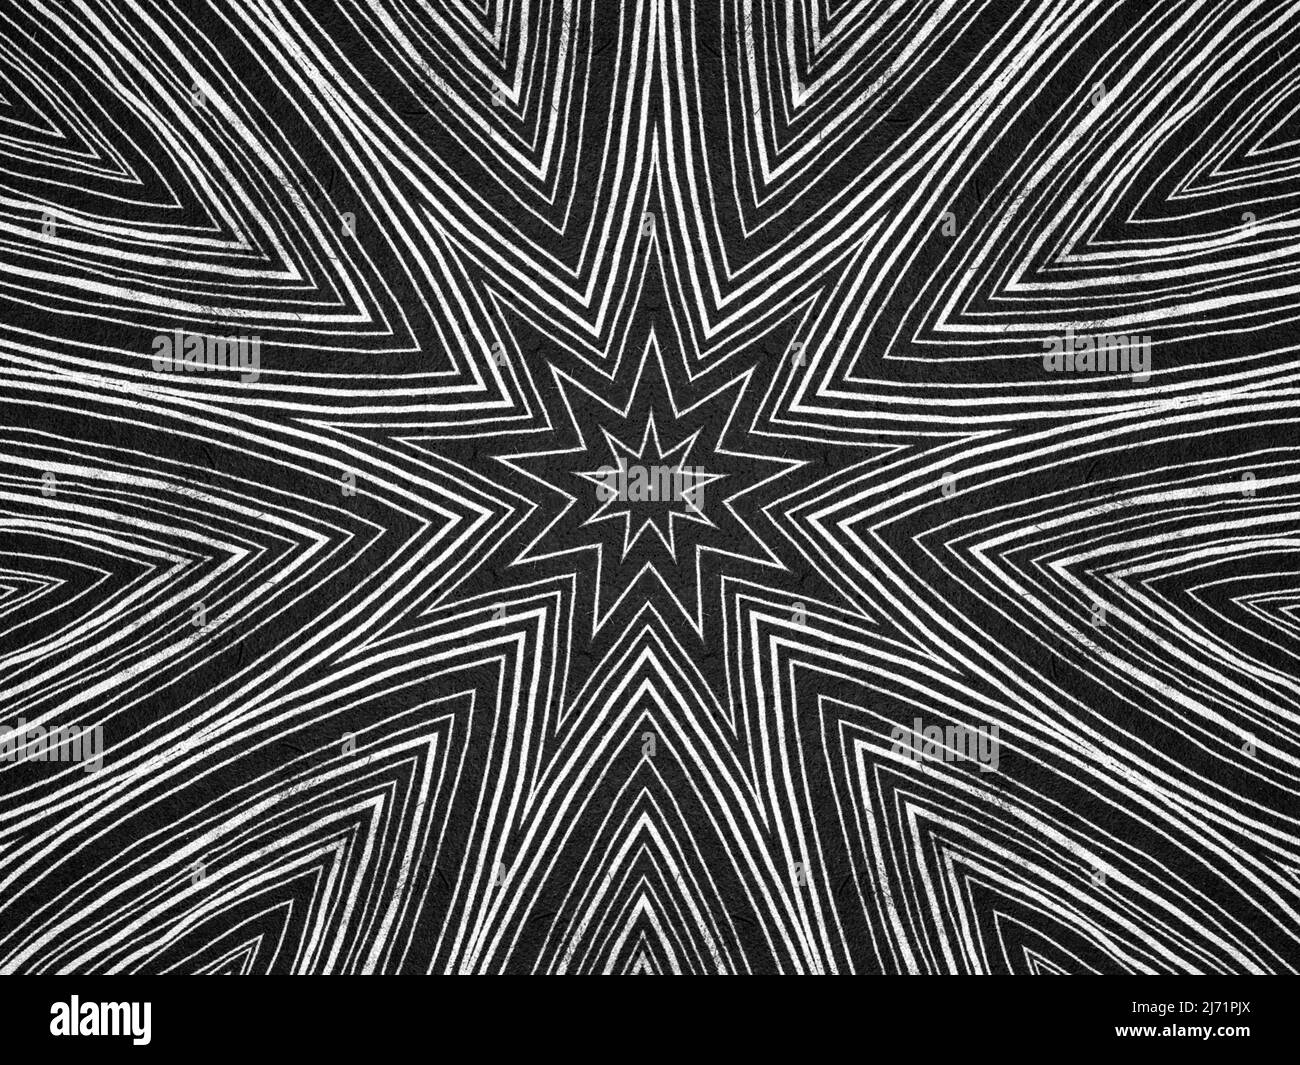 Textured lines and star shapes psychedelic pattern. Black and white illustration. Stock Photo